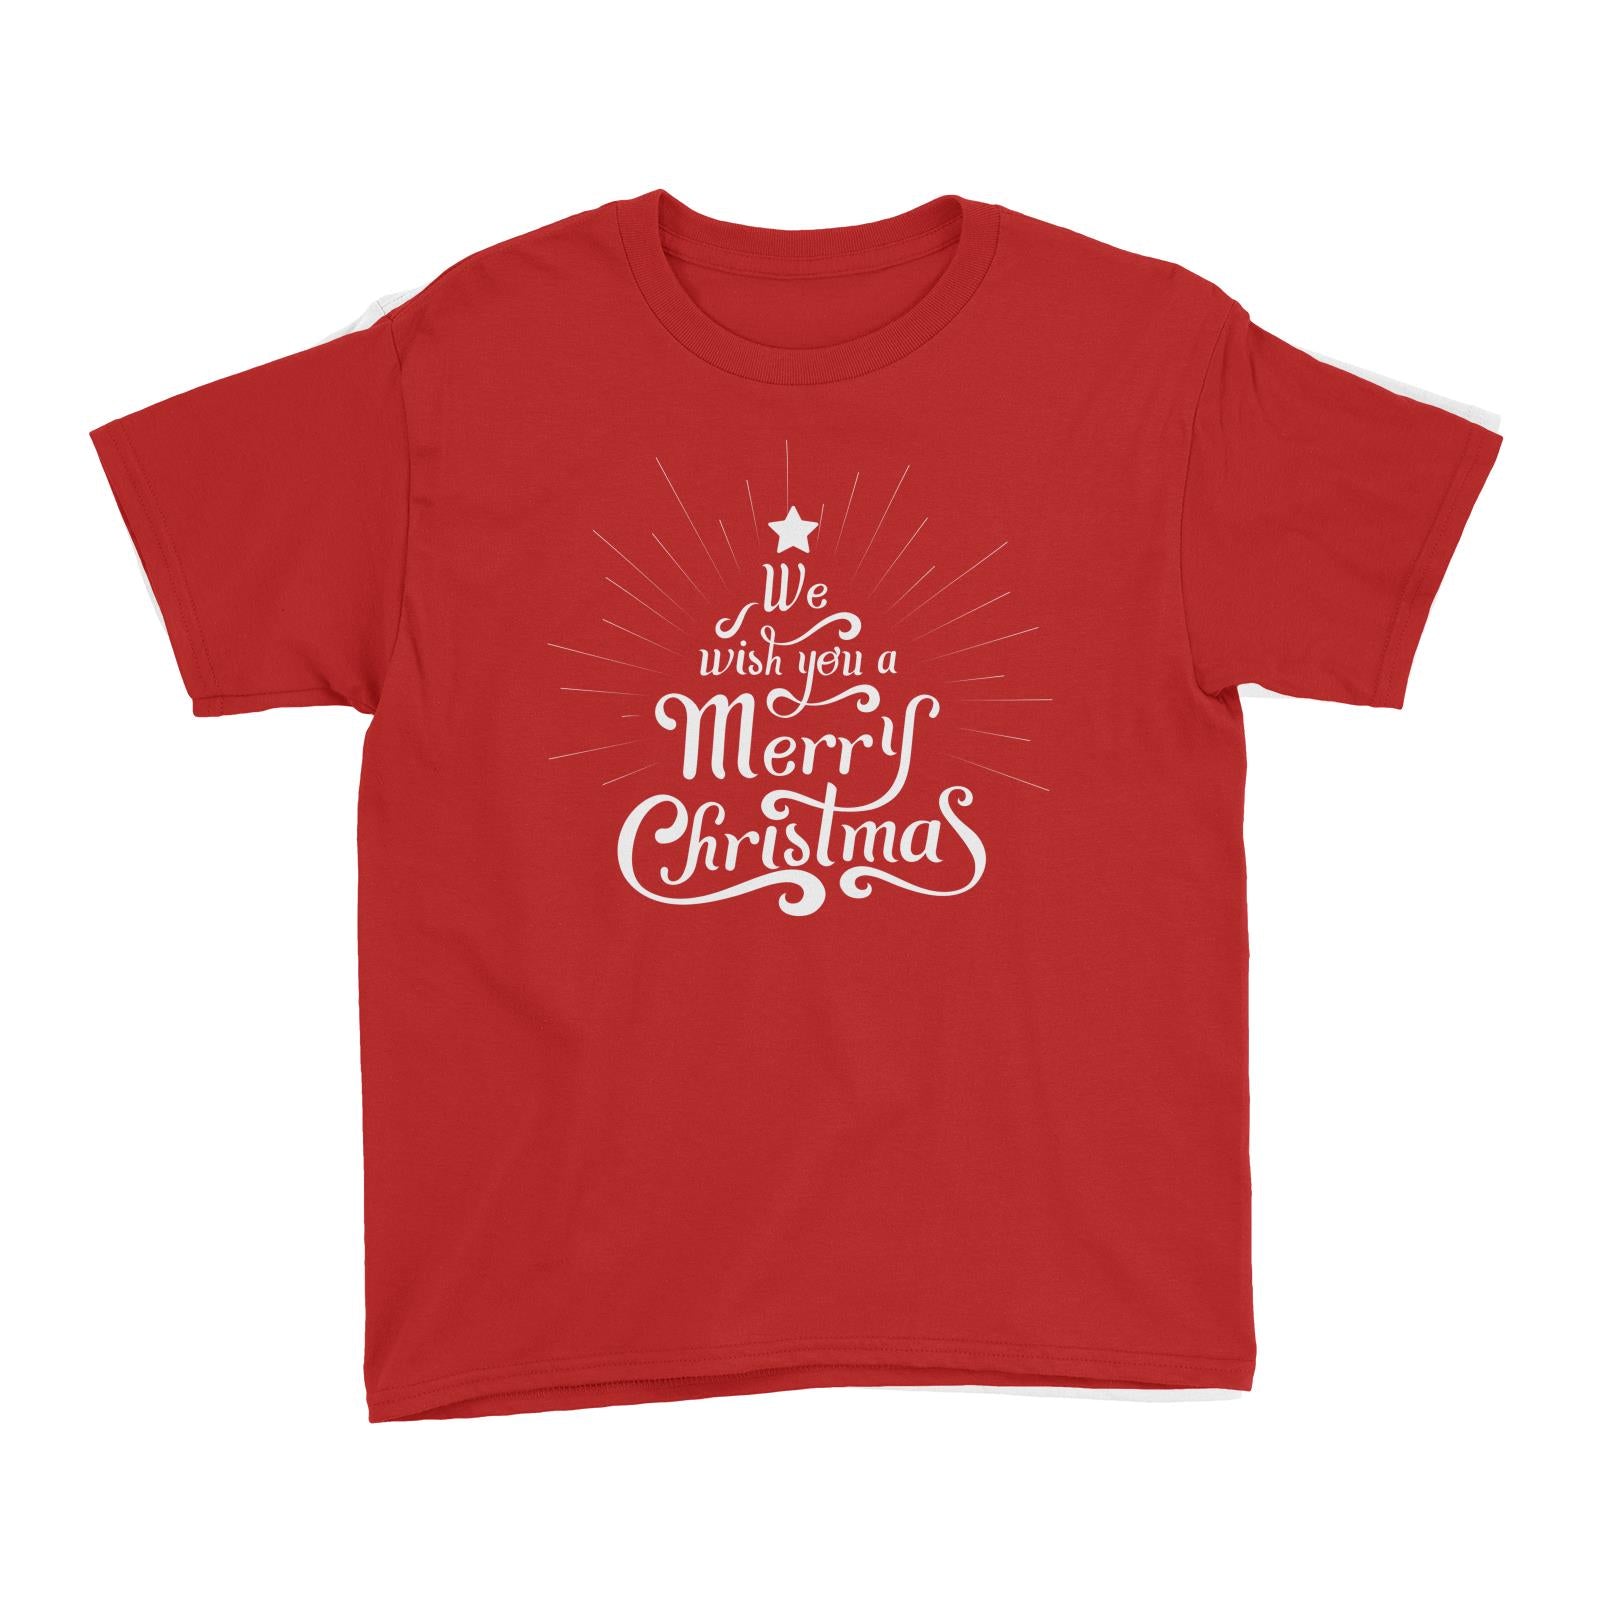 We Wish You A Merry Christmas Greeting Kid's T-Shirt  Lettering Matching Family